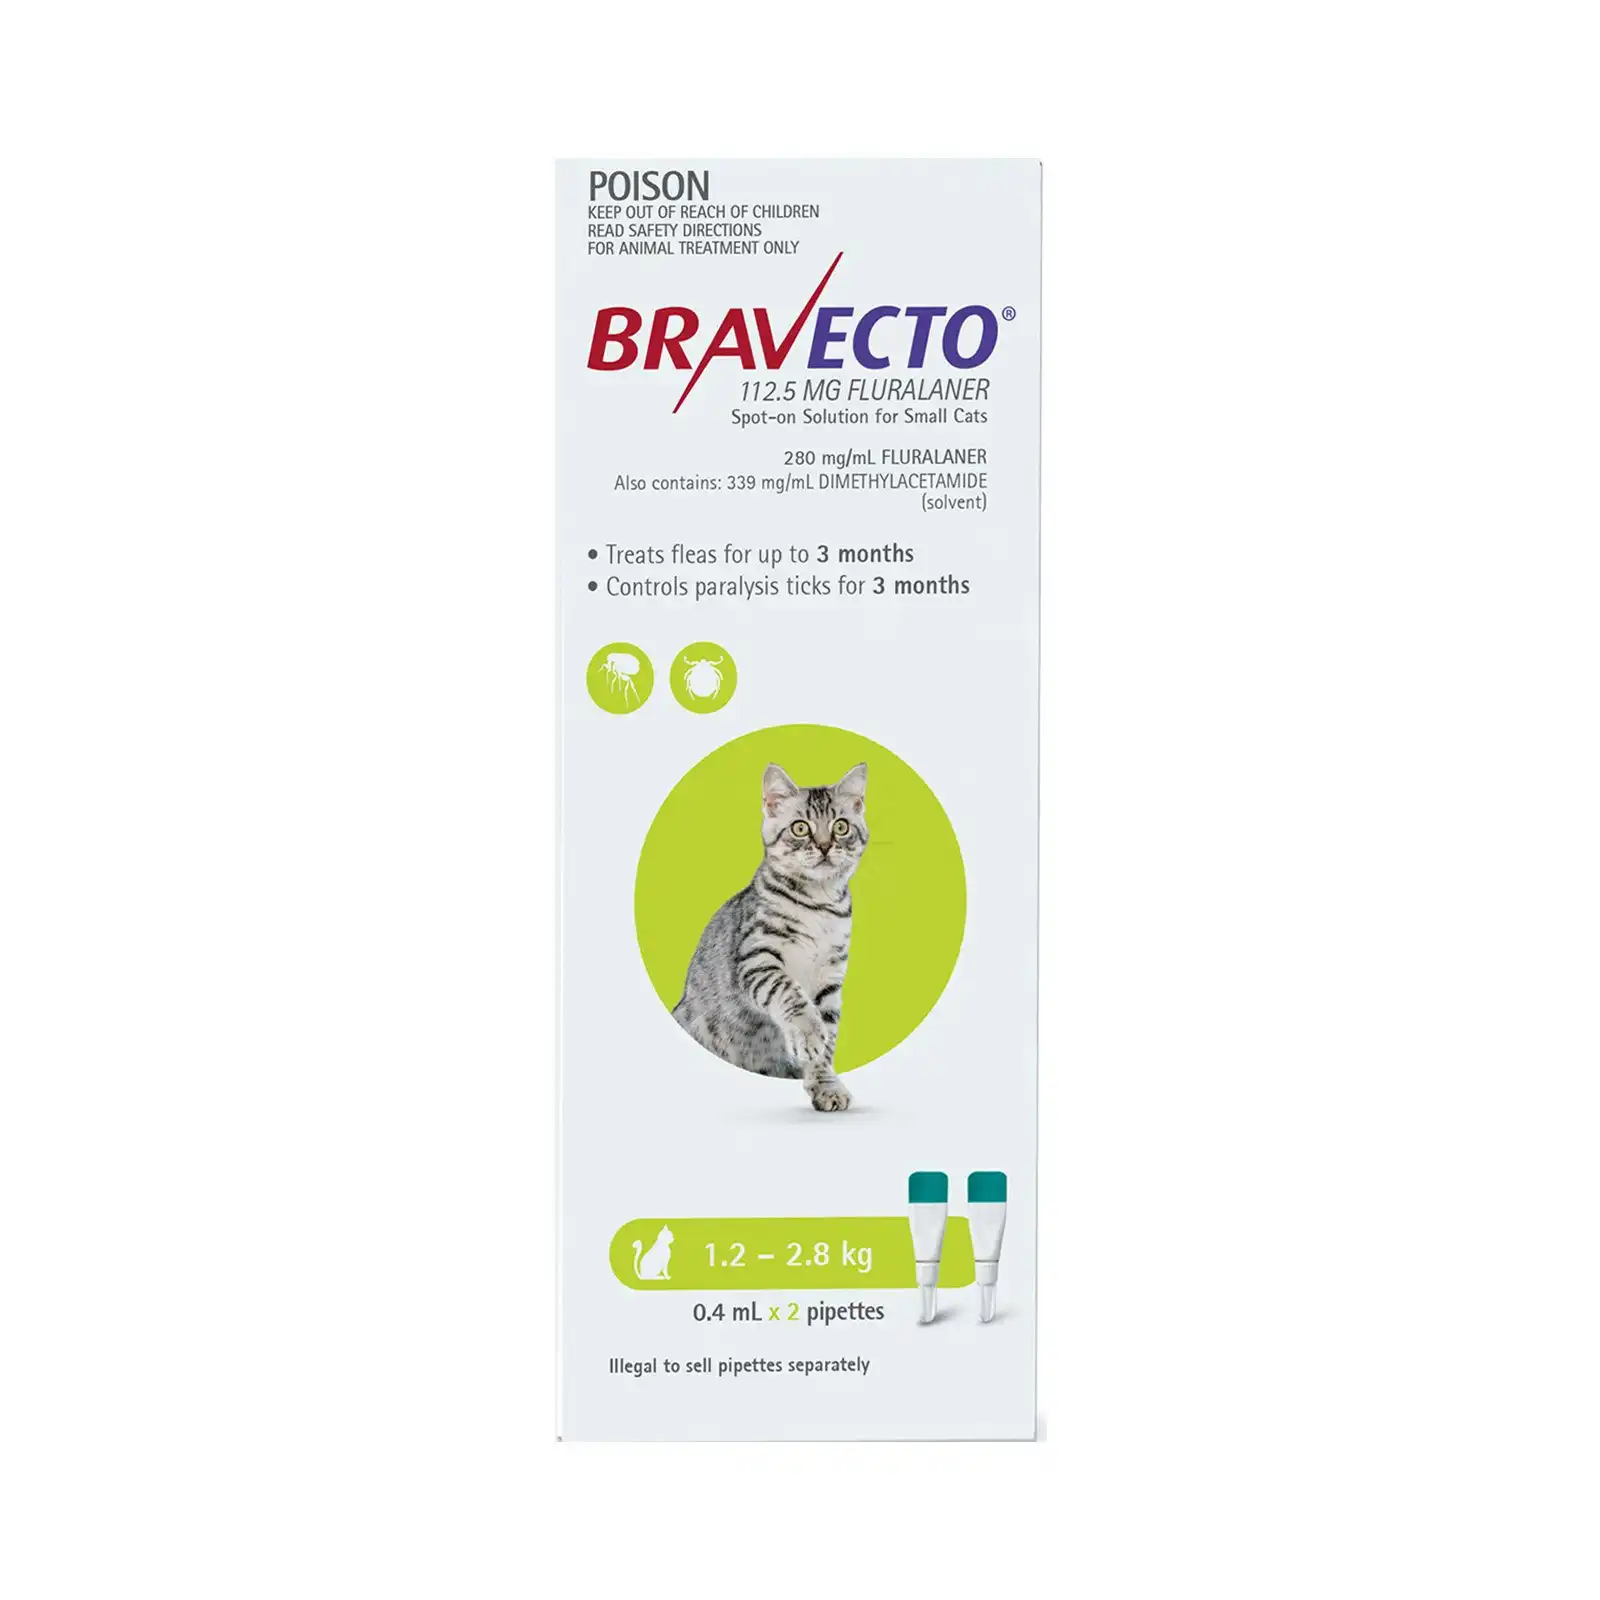 Bravecto Spot On For Cats 1.2-2.8 Kg (Light Green) 2 Pipettes